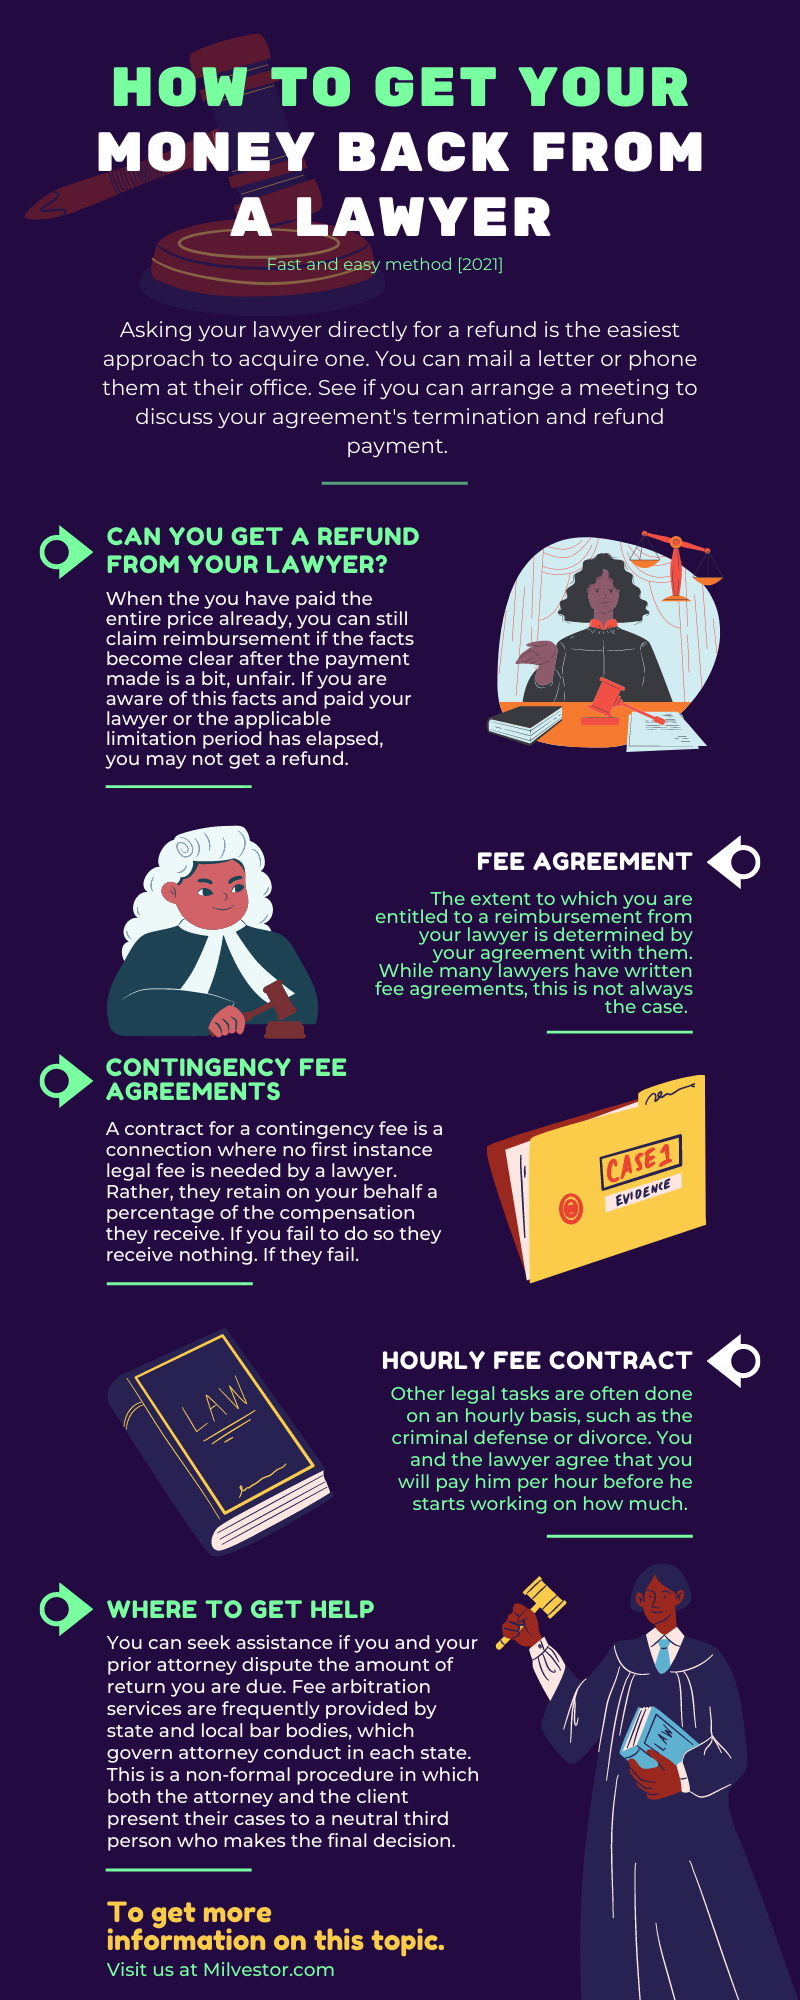 How to get your money back from a lawyer